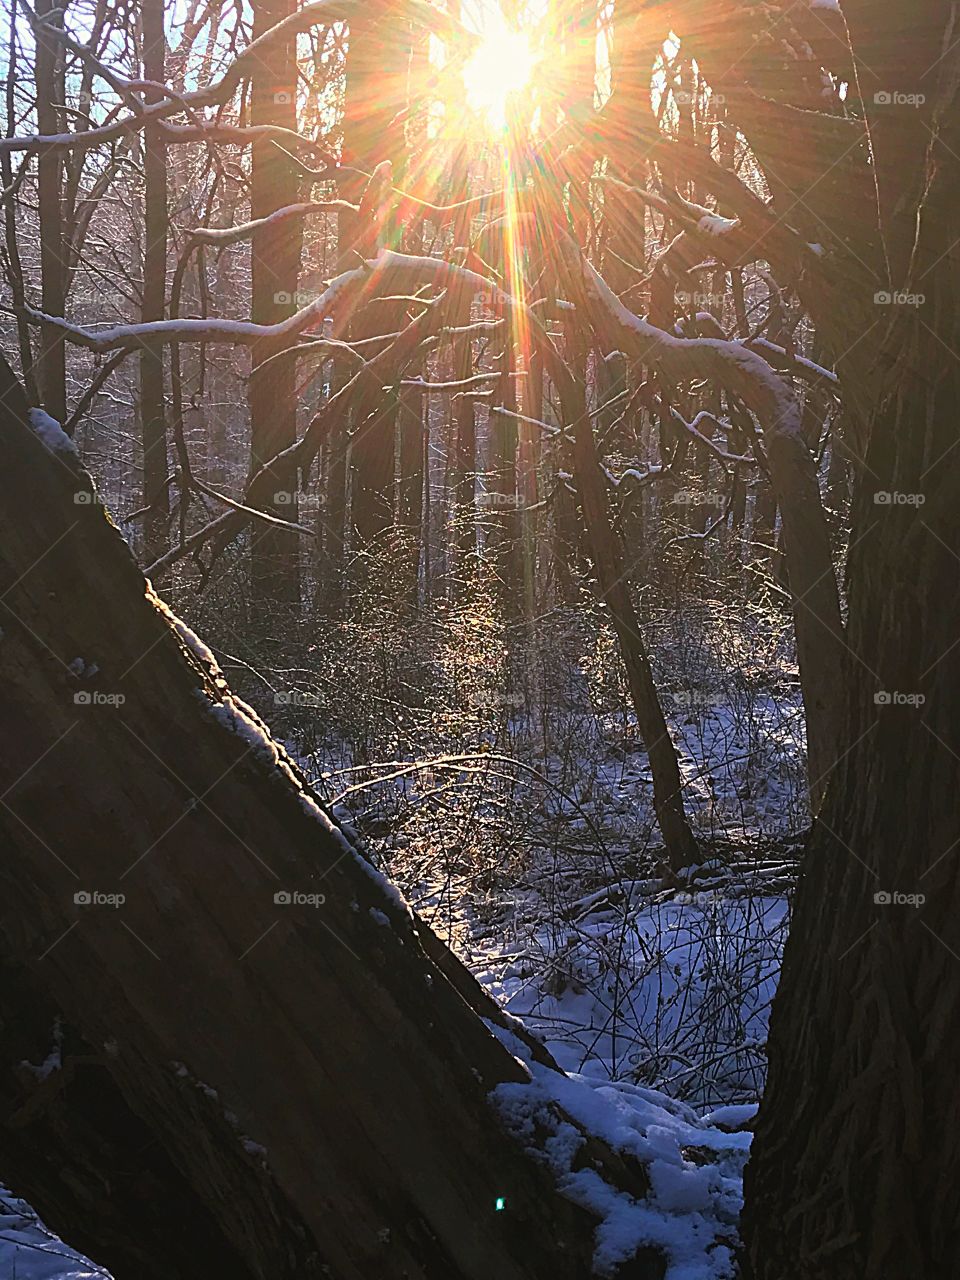 Phoshotz- a winter evening deep in the forest.